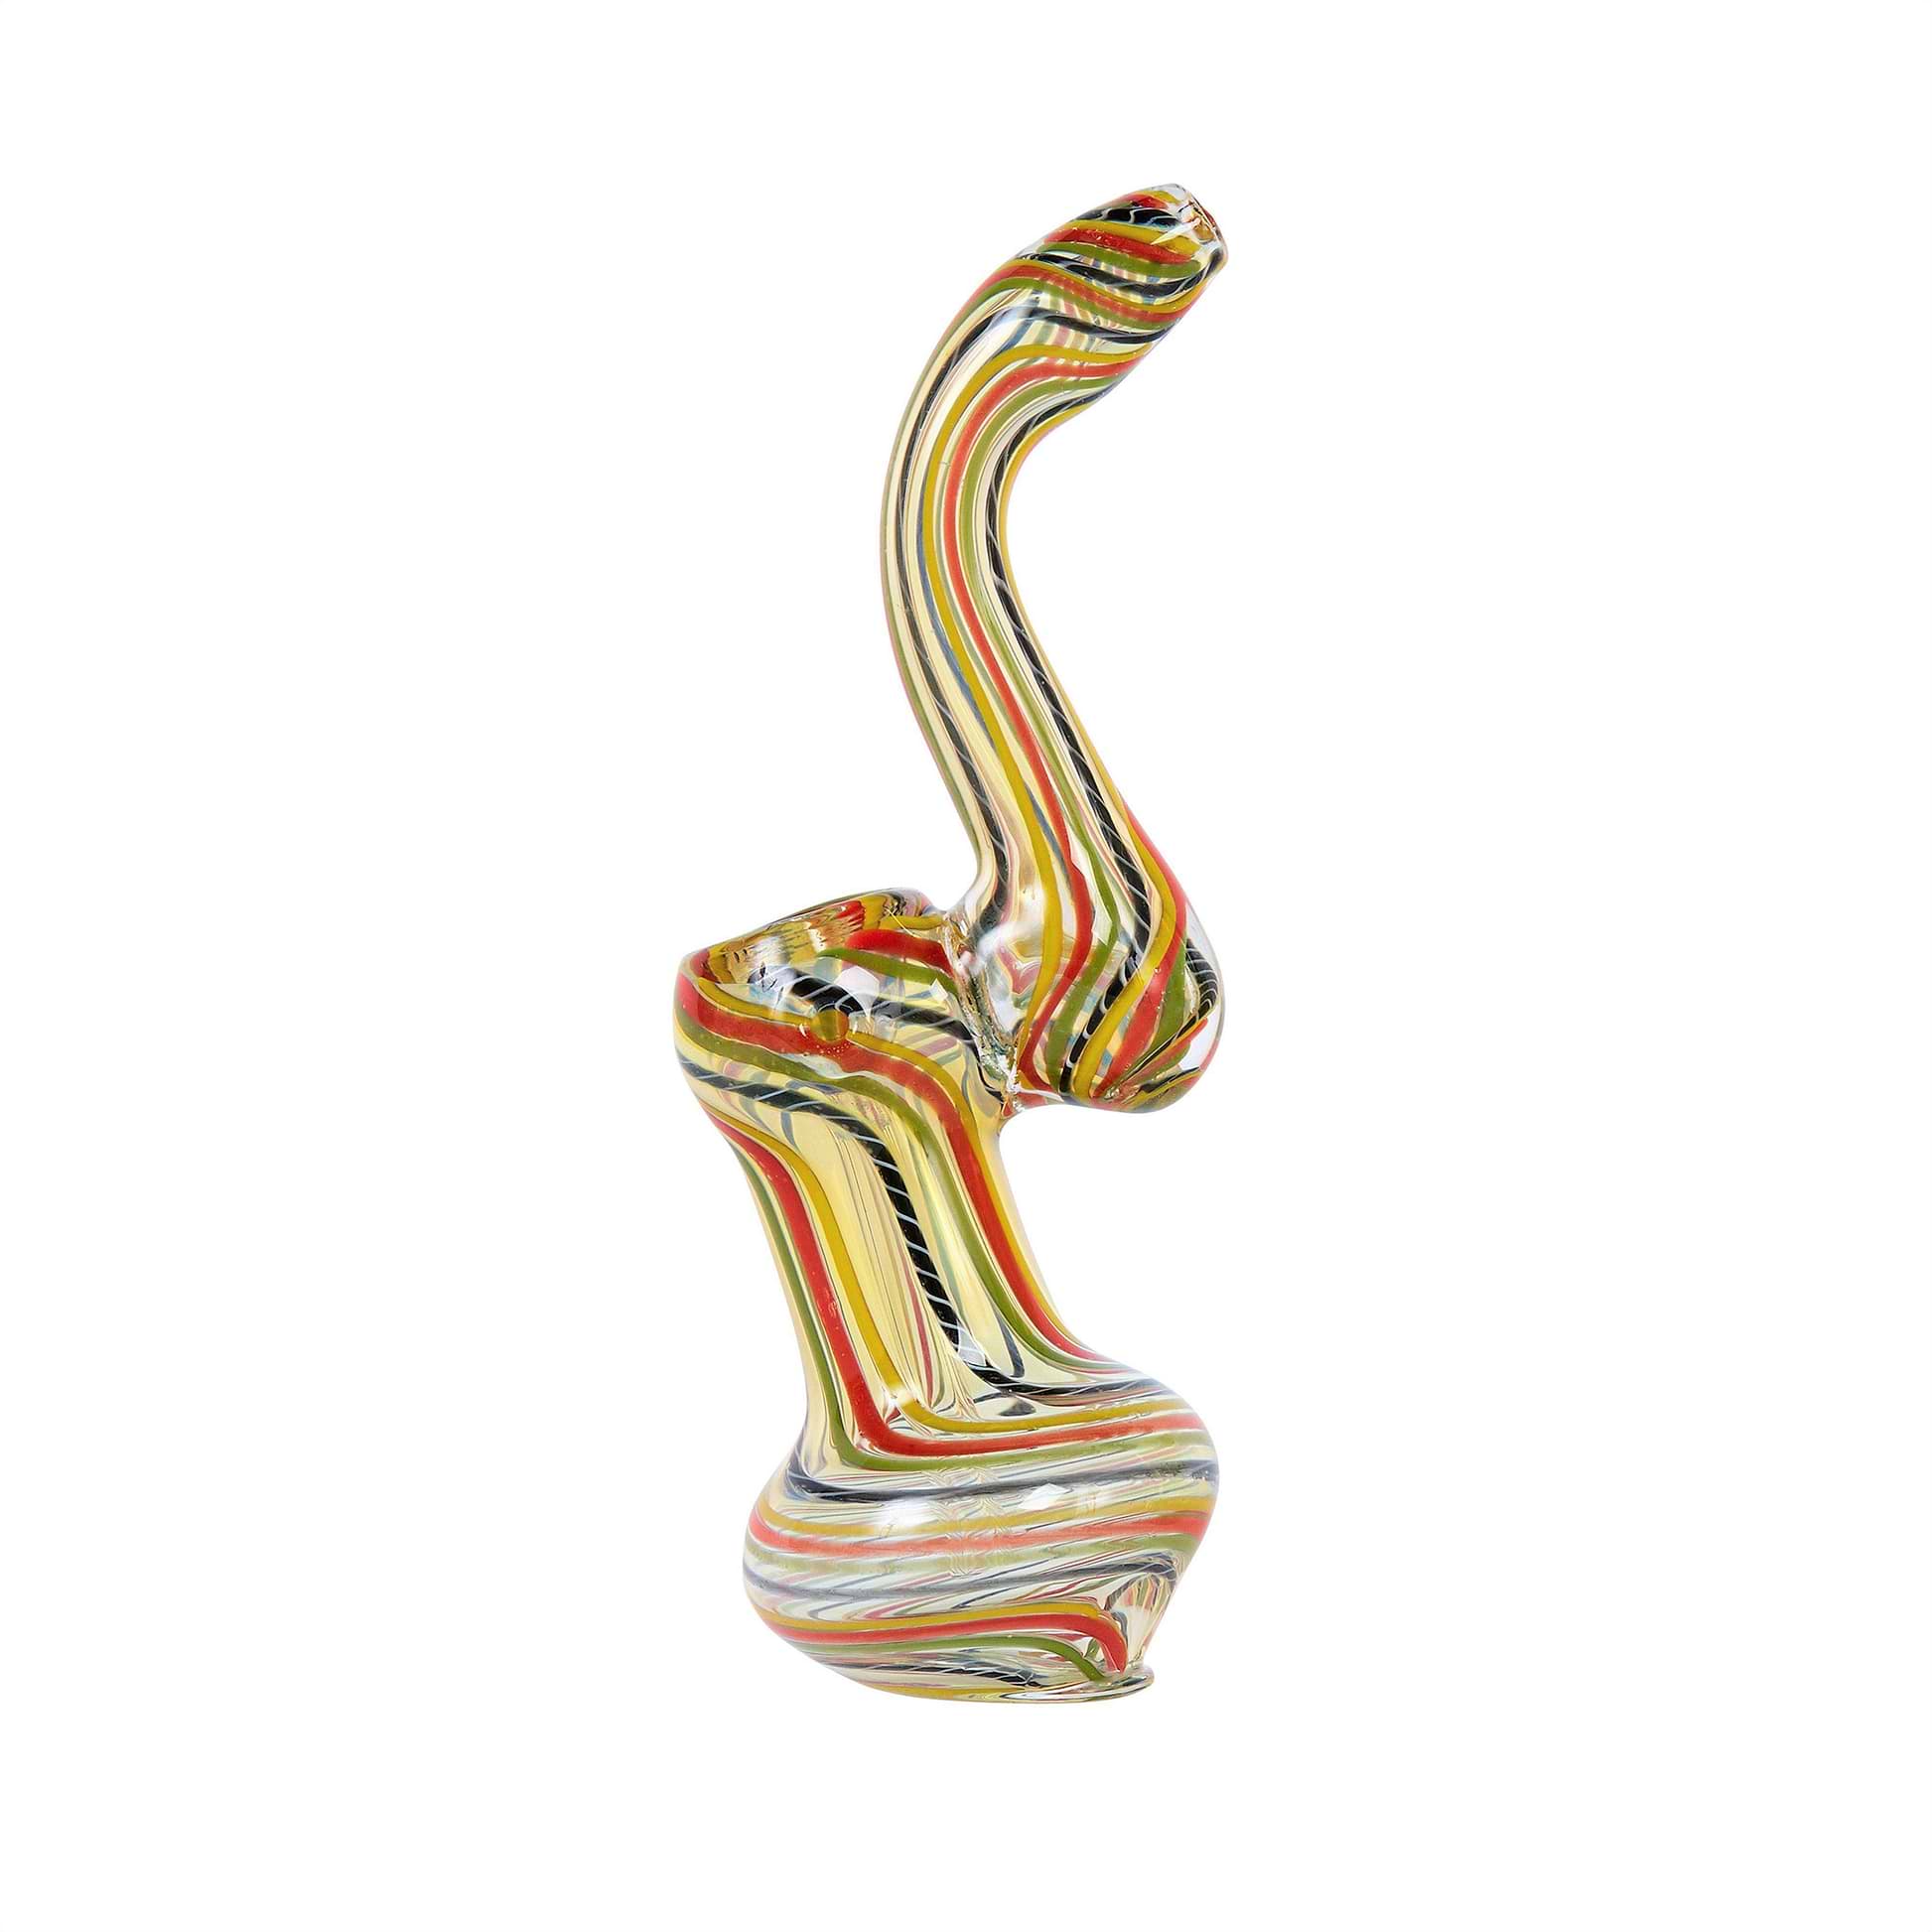 glass bubbler in artistic swirling colors